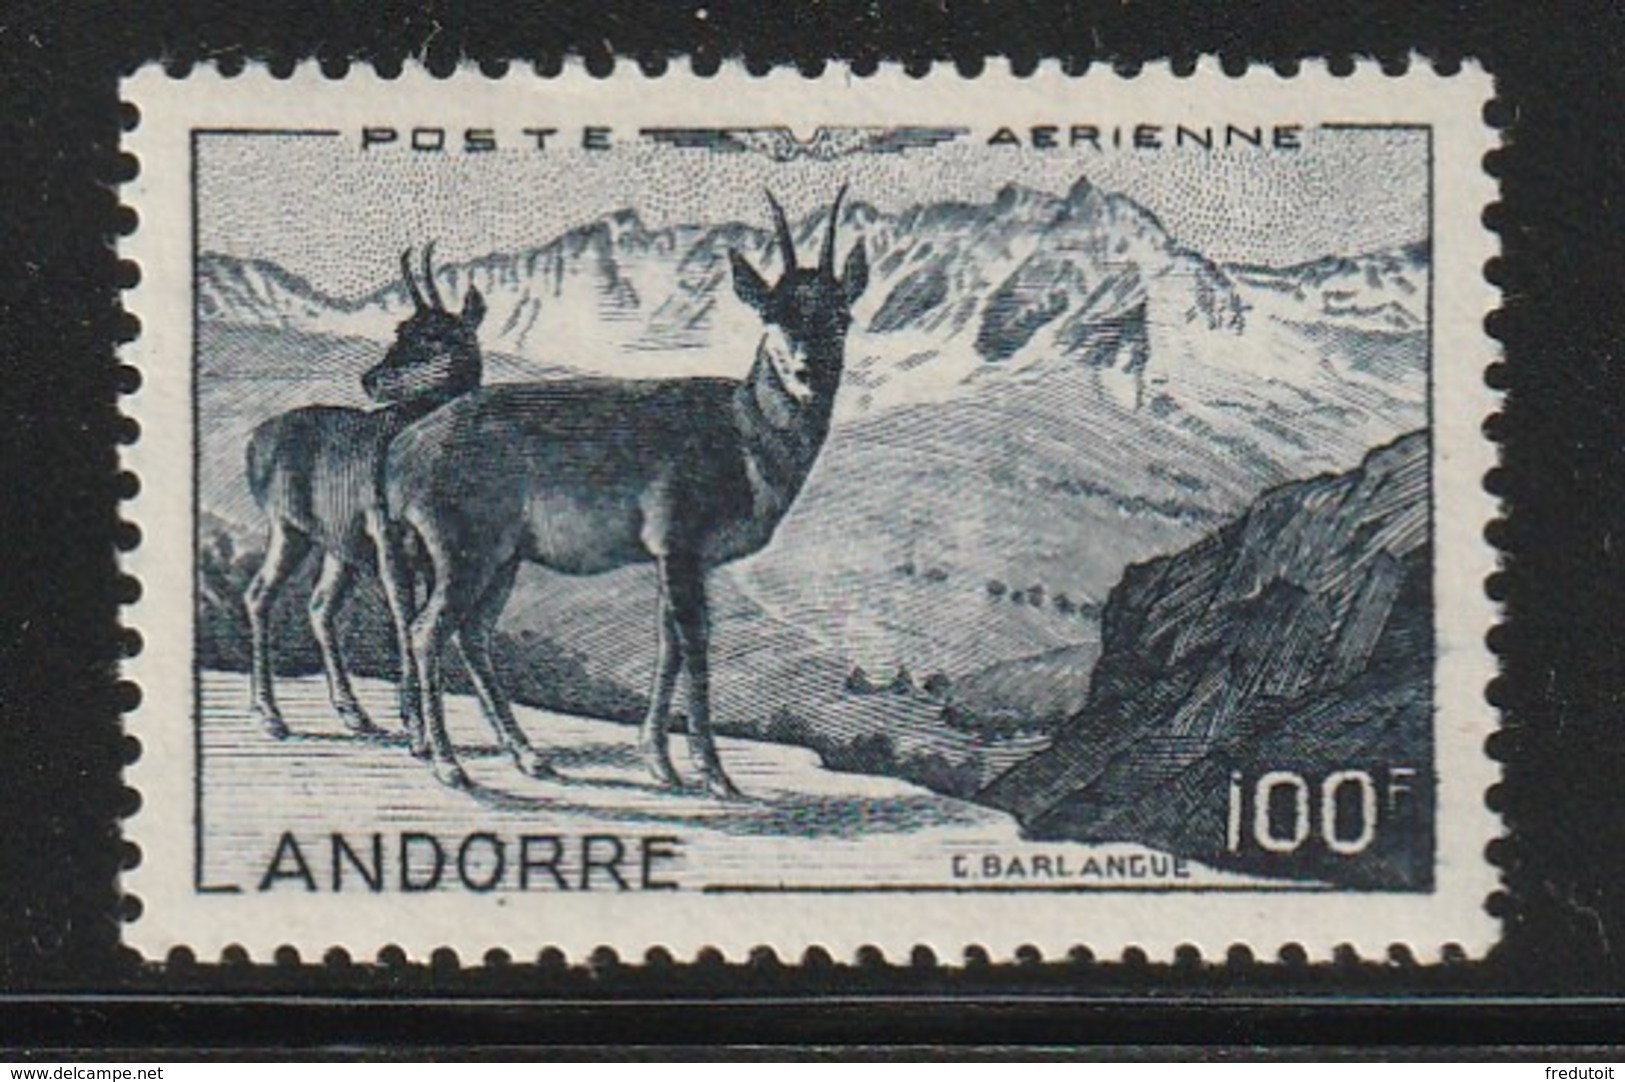 ANDORRE - PA N°1 ** (1950) Paysages : Isards - Airmail